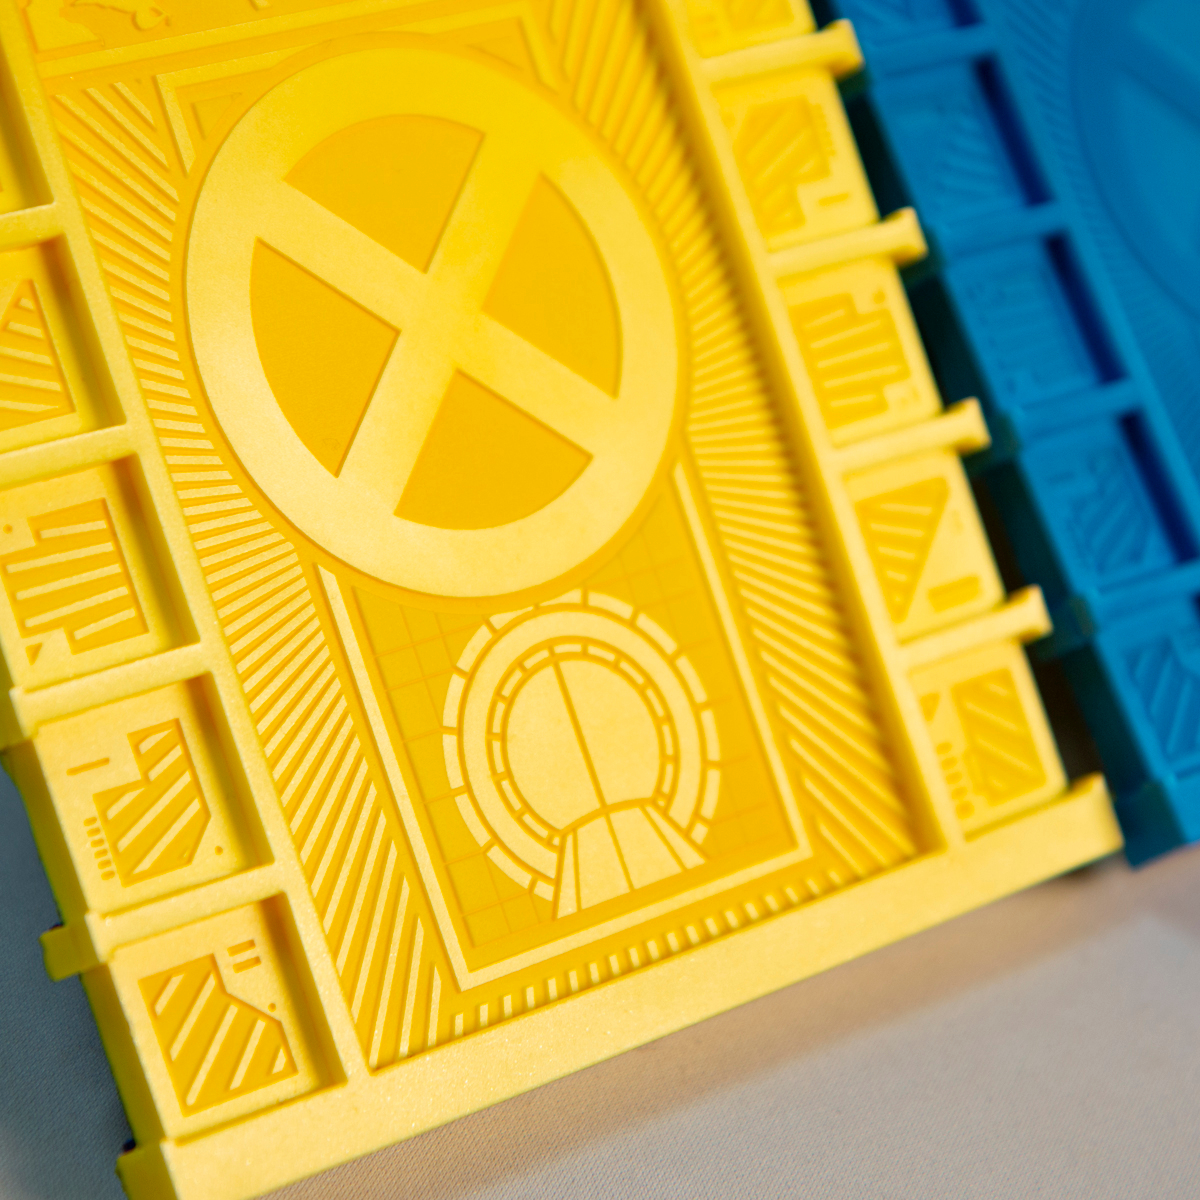 An angled shot of the Yellow Beam Cosmic Board showing the shining effect of the raised surfaces as well as a close up of the comic book inspired design